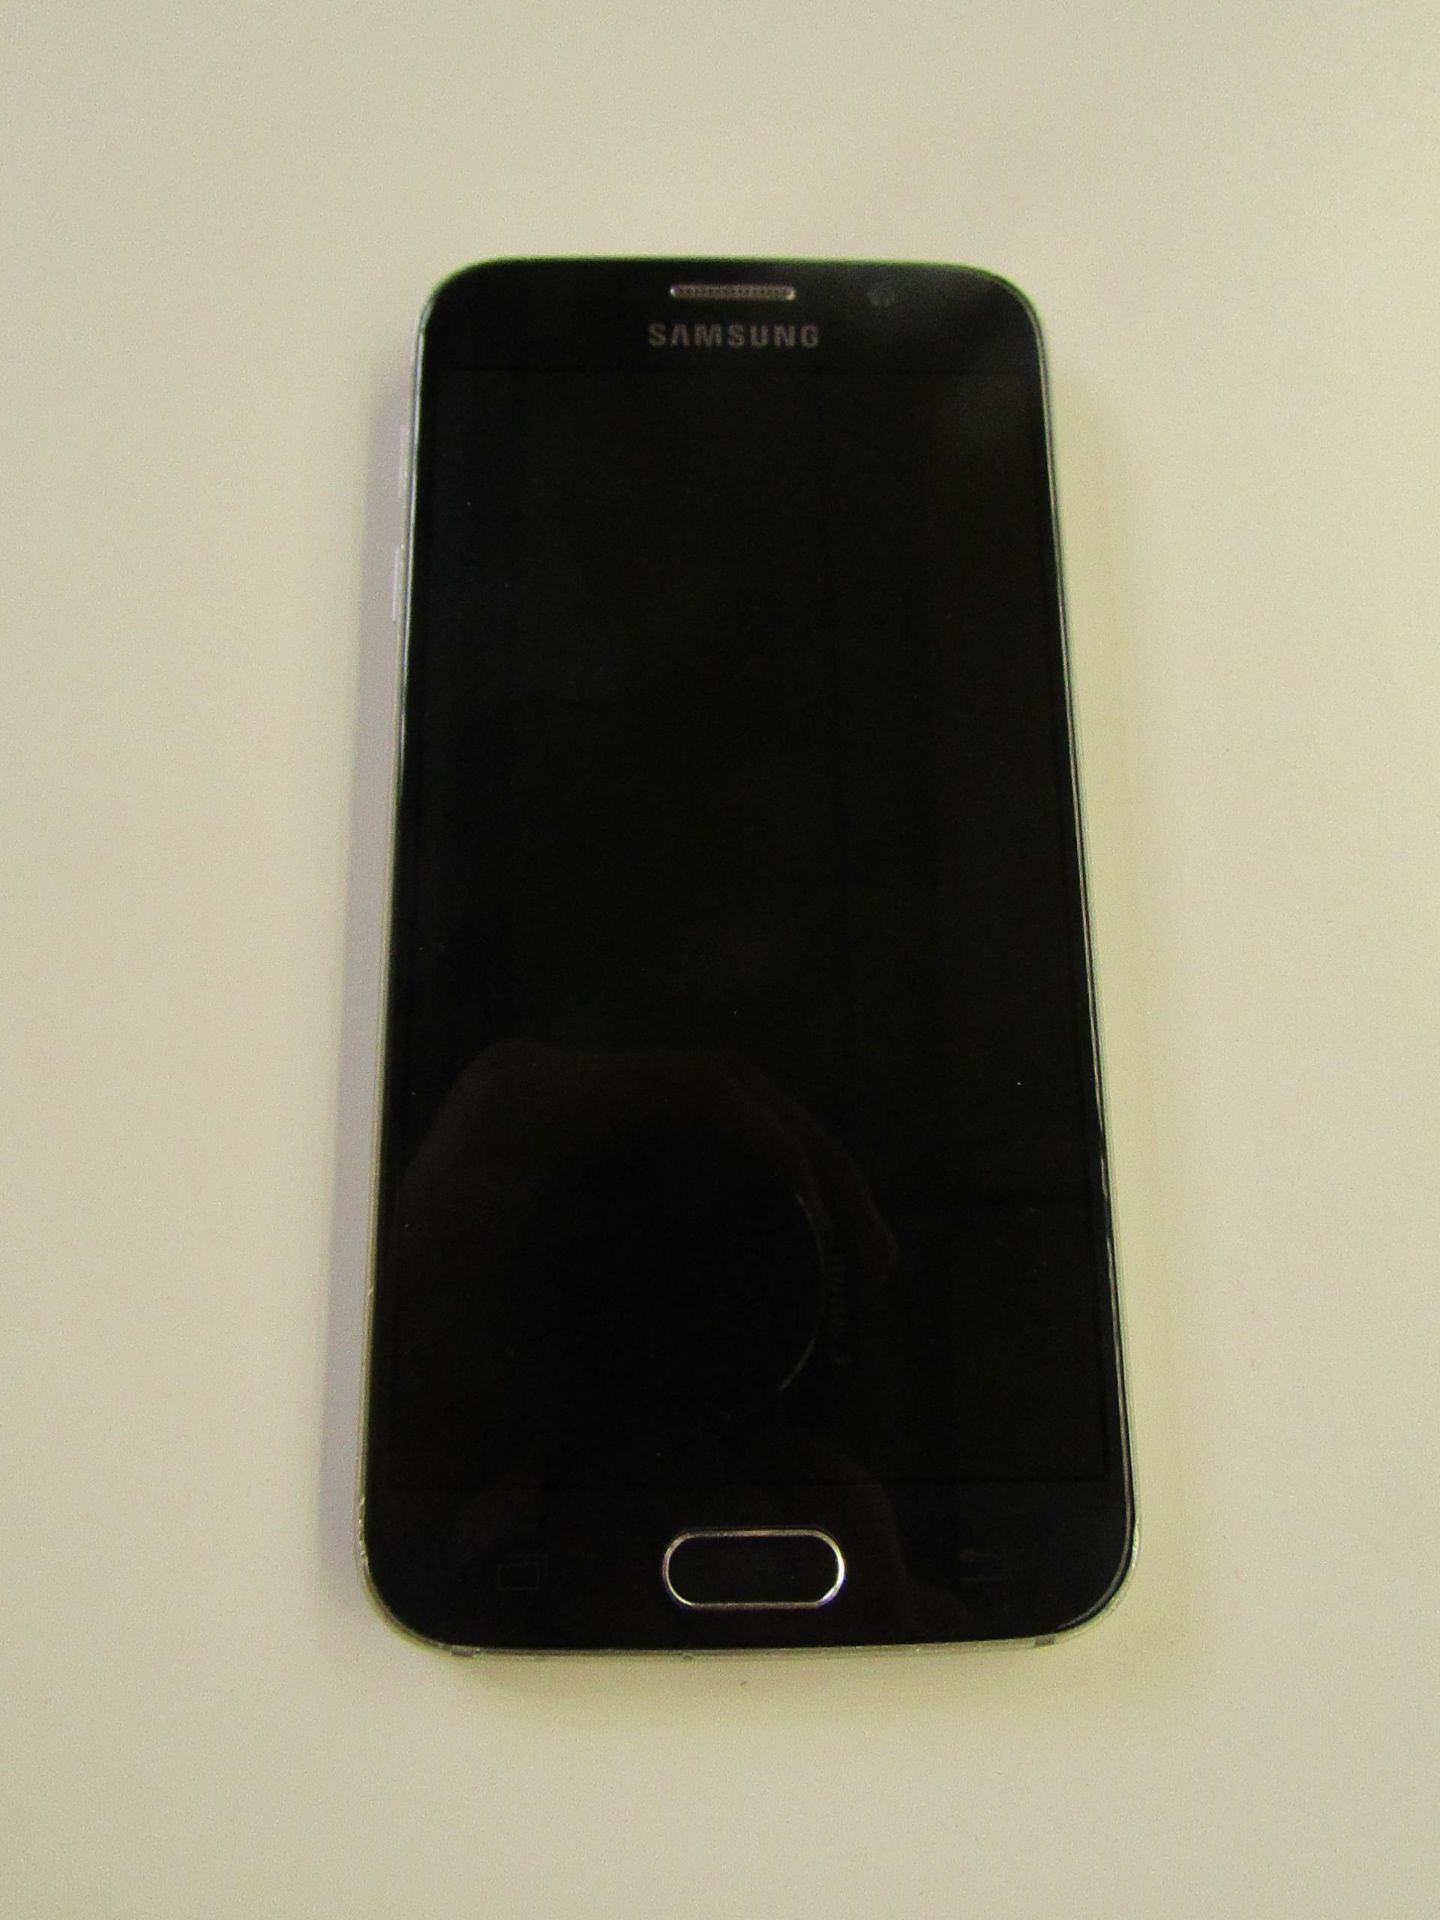 Samsung Galaxy S6 Slim black sapphire, 32GB, powers on but has faulty screen. Comes with box.